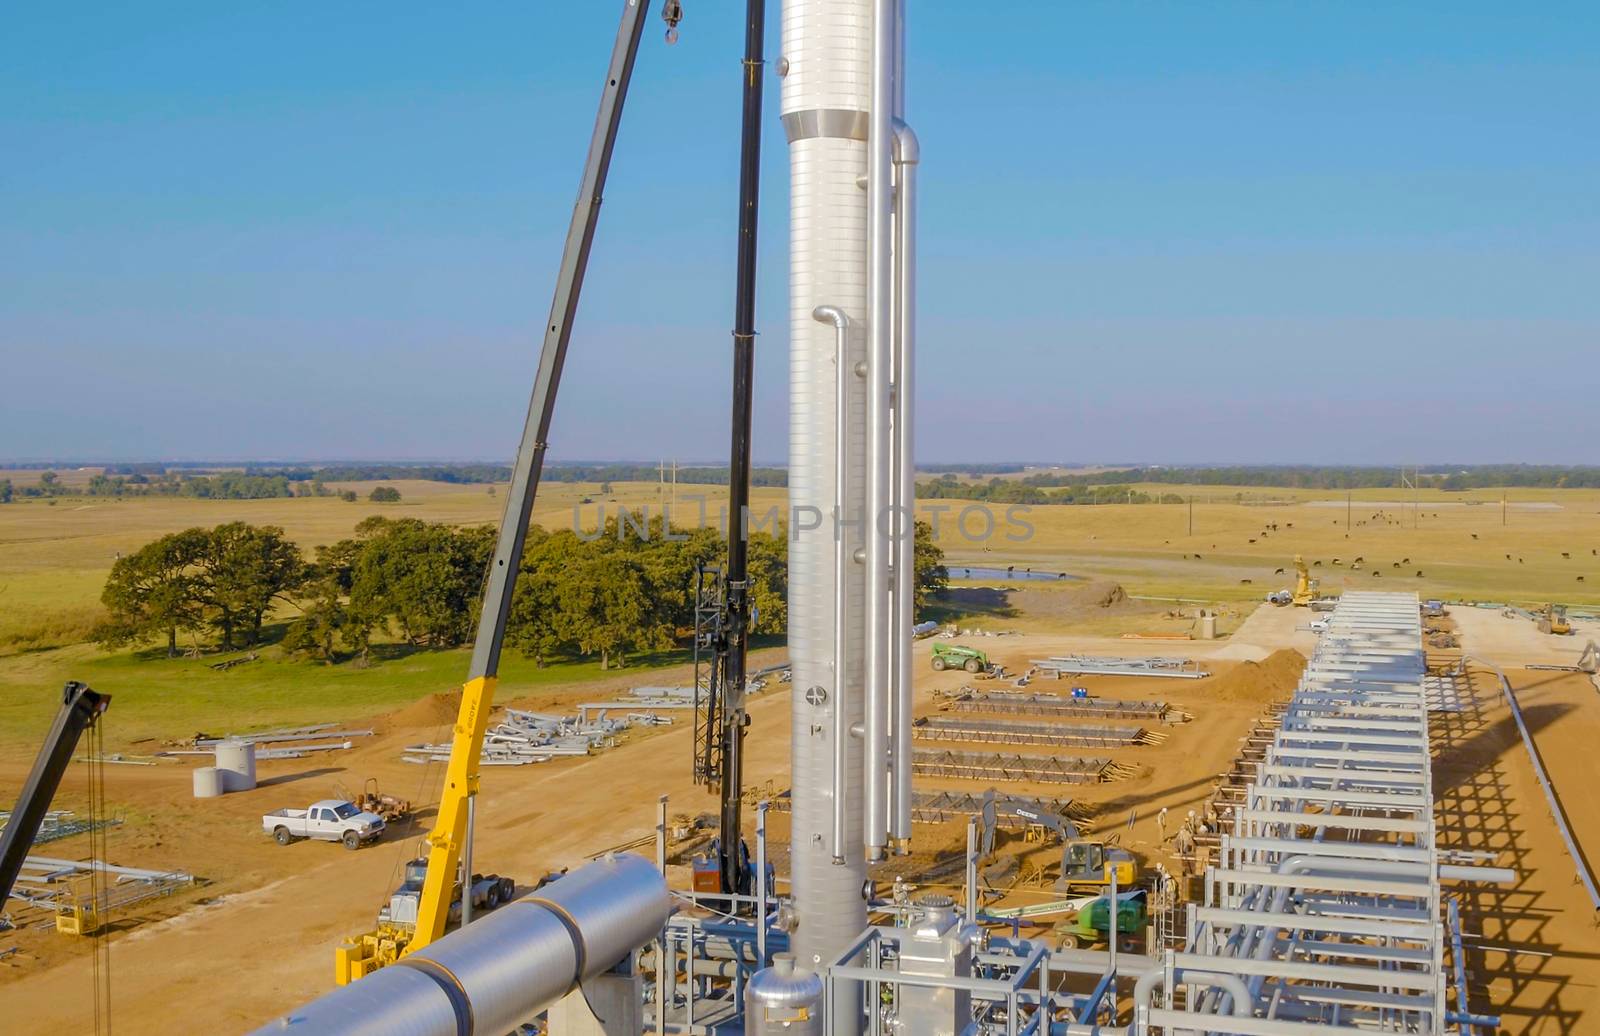 Installation of the distillation column with a lift crane. Construction of an oil refinery.